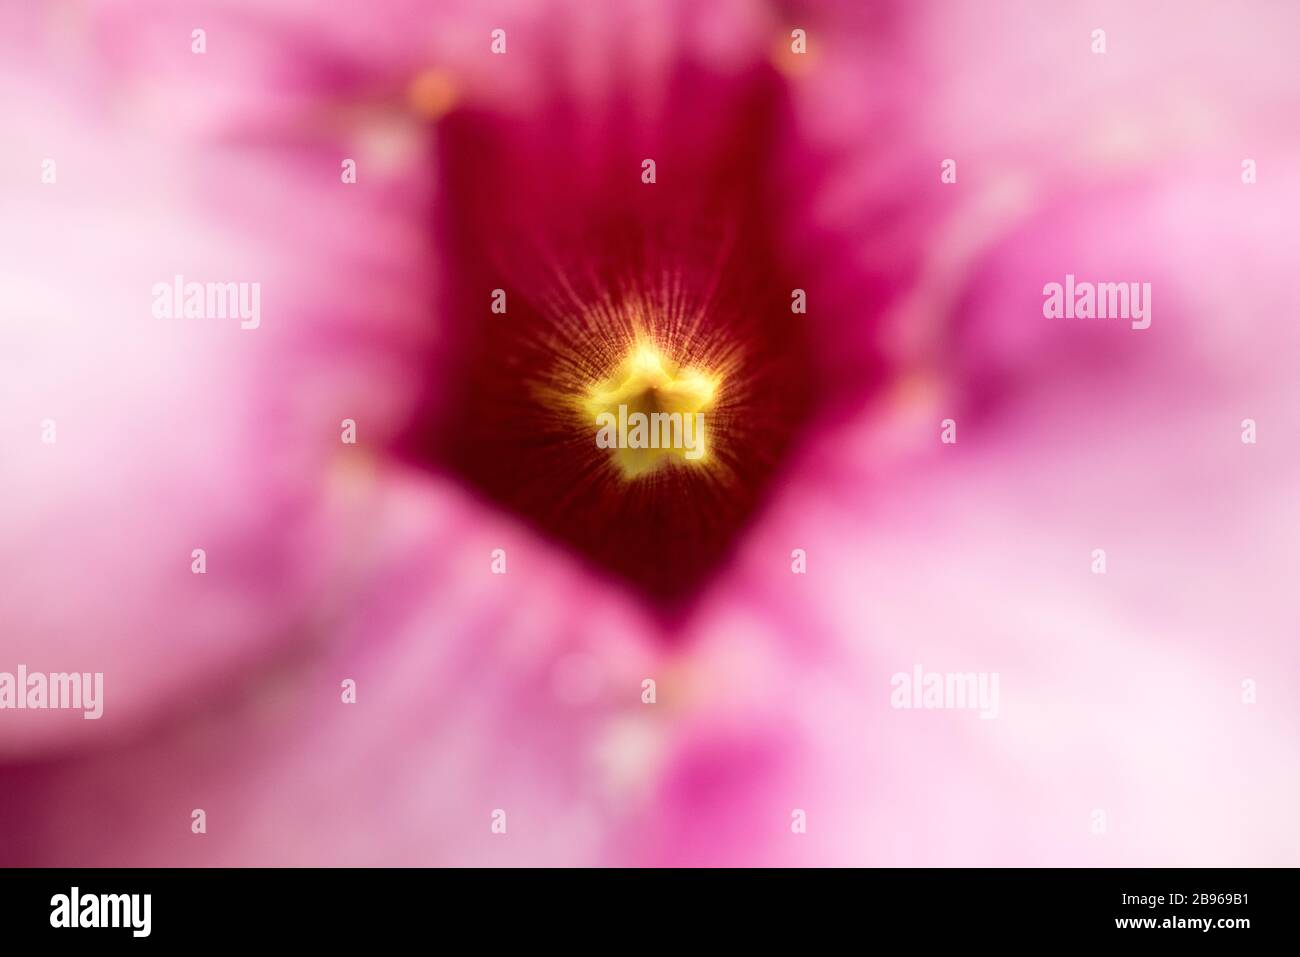 Abstract, artistic pink flower with bright, yellow, small star in the center, resembles a kaleidoscope. Stock Photo